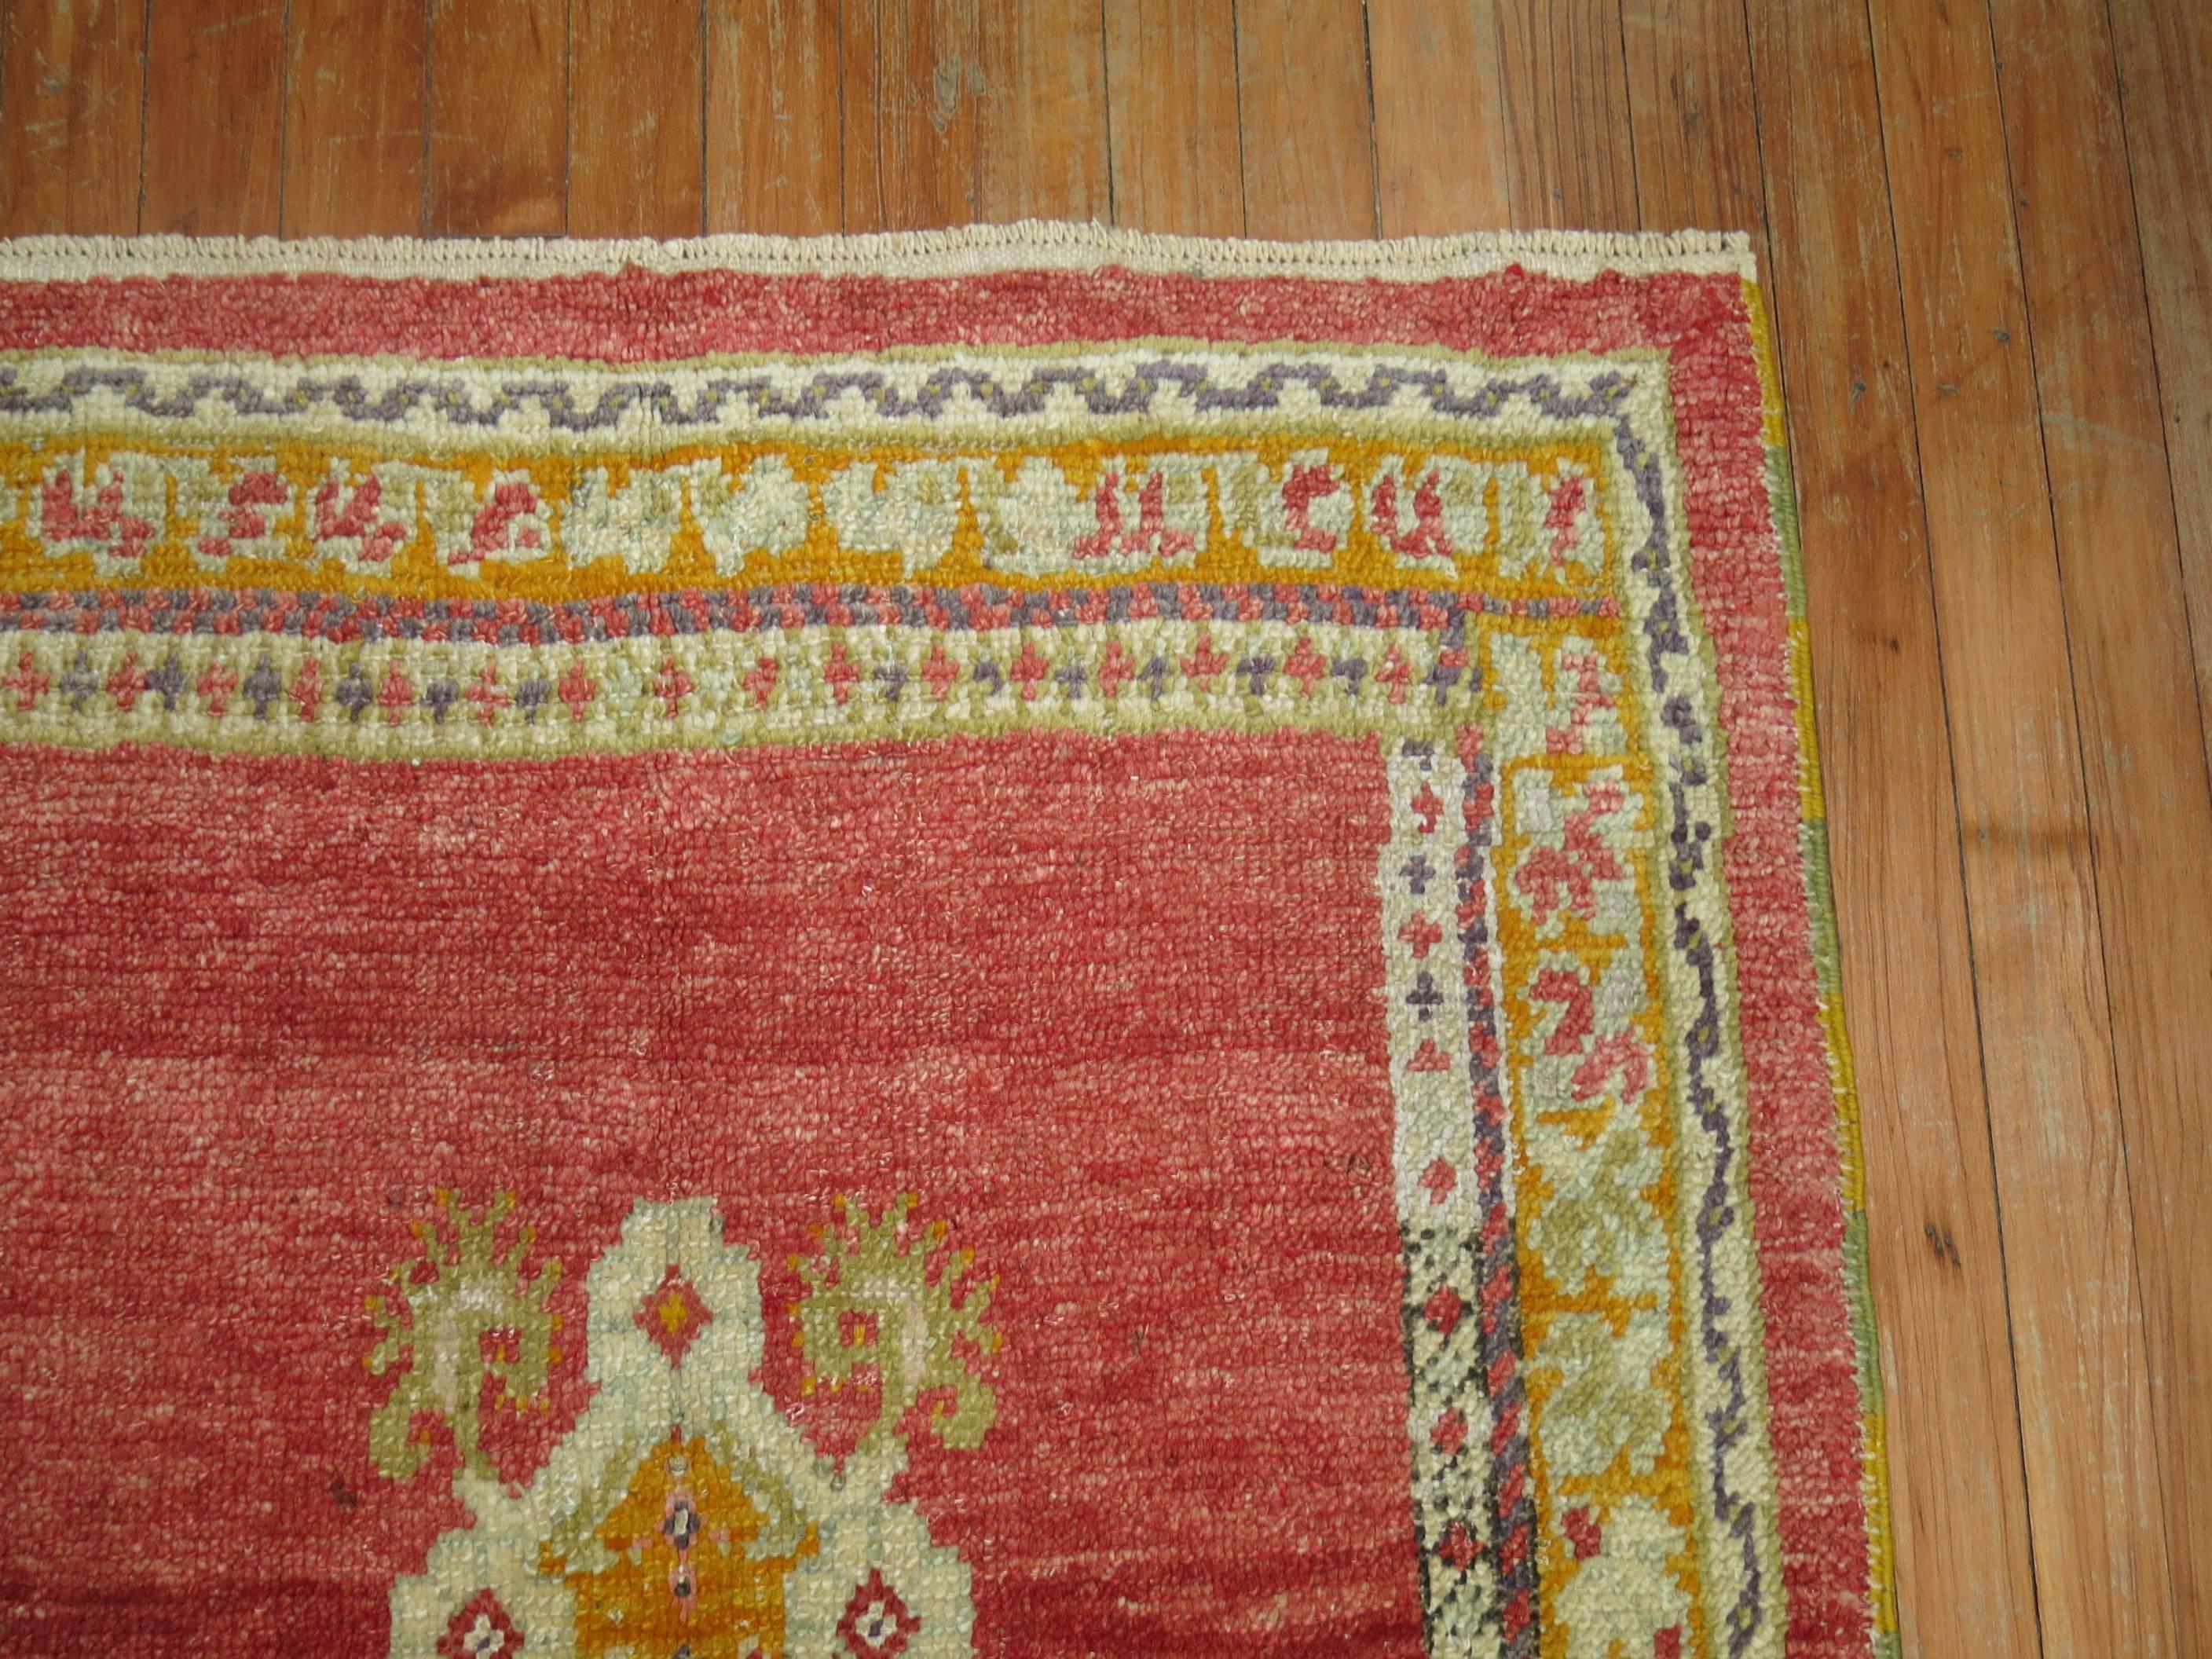 A colorful one of a kind scatter size early 20th century antique Turkish Oushak rug featuring an unusual off center medallion intentionally woven to give the rug a unique character.

Measures: 3'1'' x 4'4''.